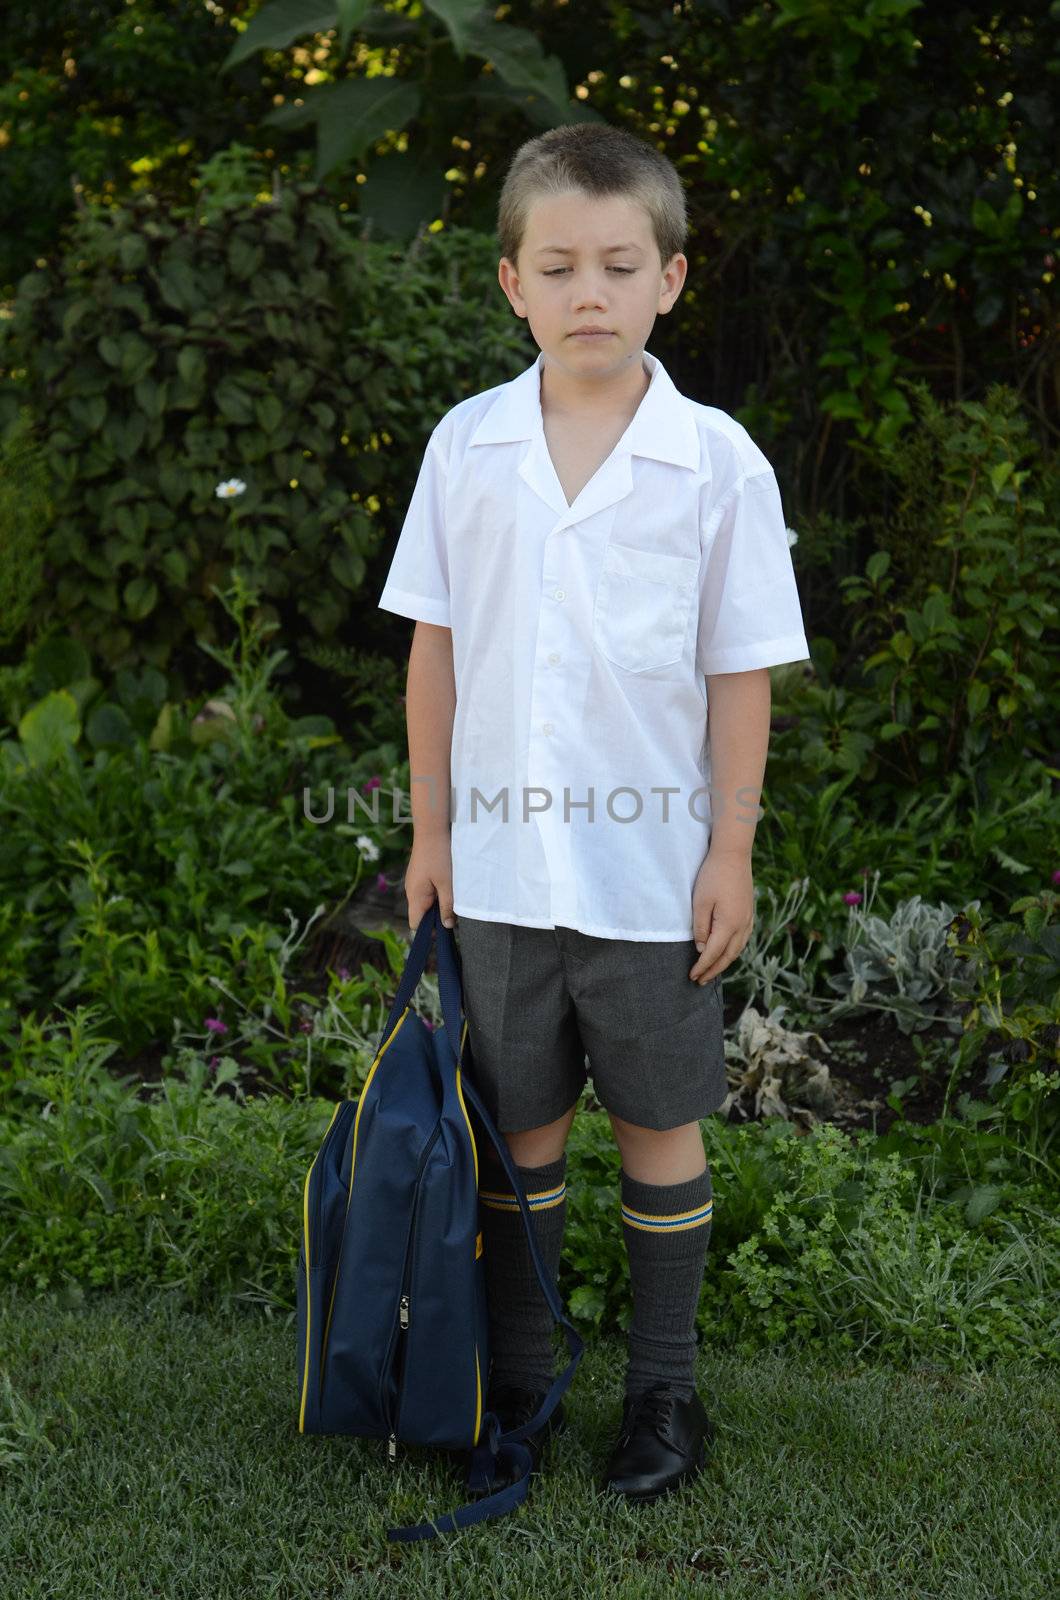 Schooboy sad or unhappy at first day of school